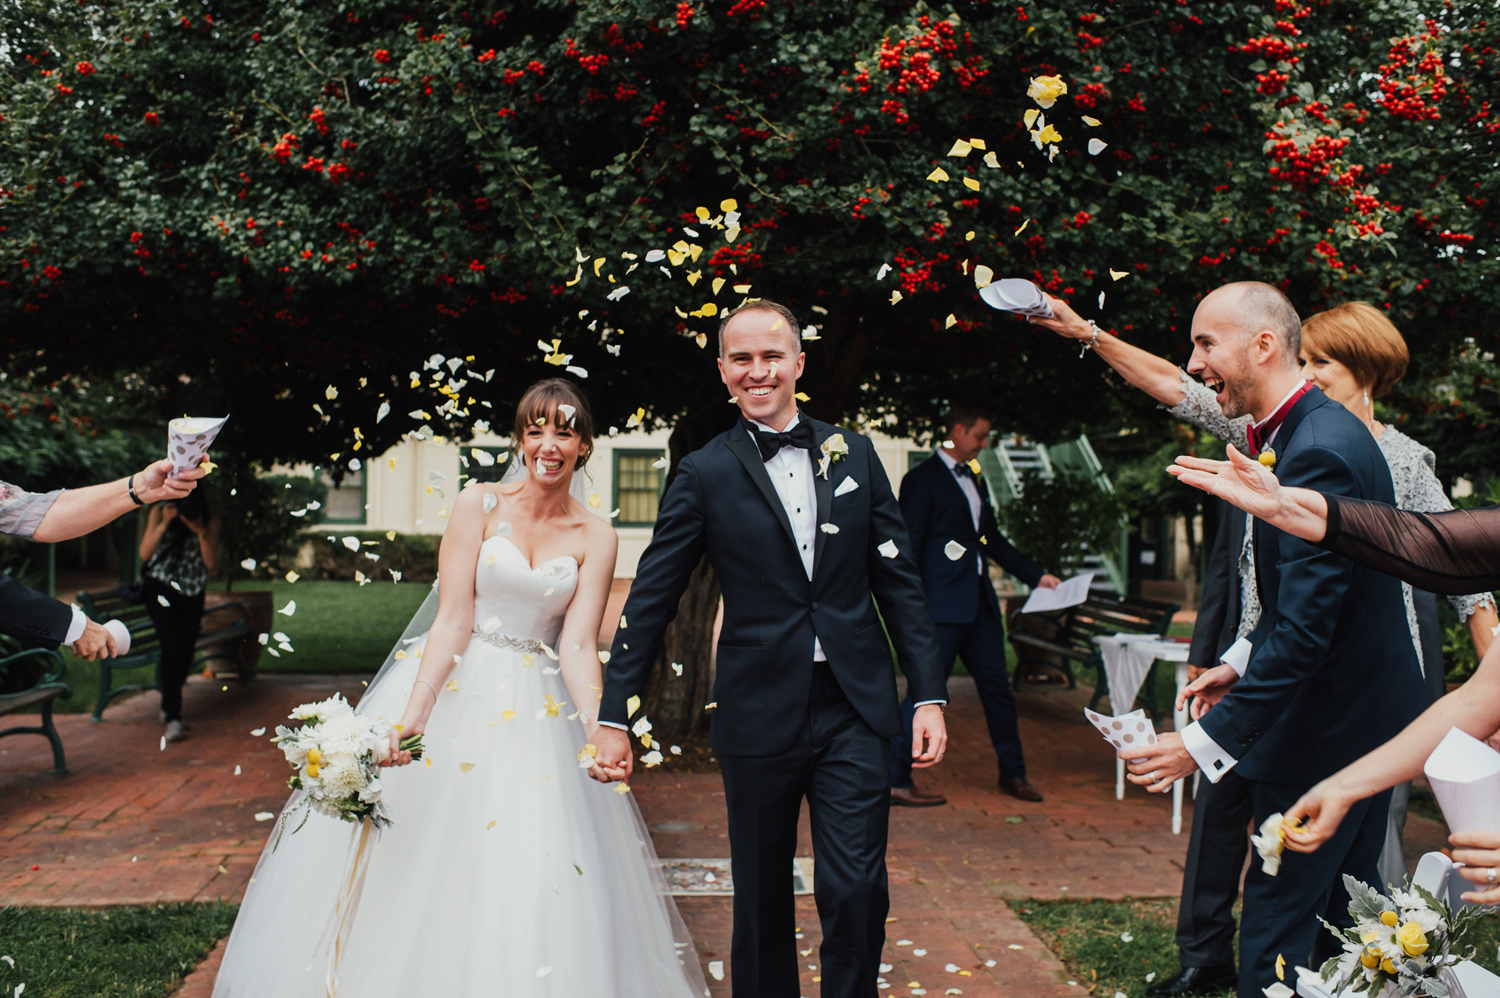 Intimate wedding ceremony with flower petals in a courtyard.